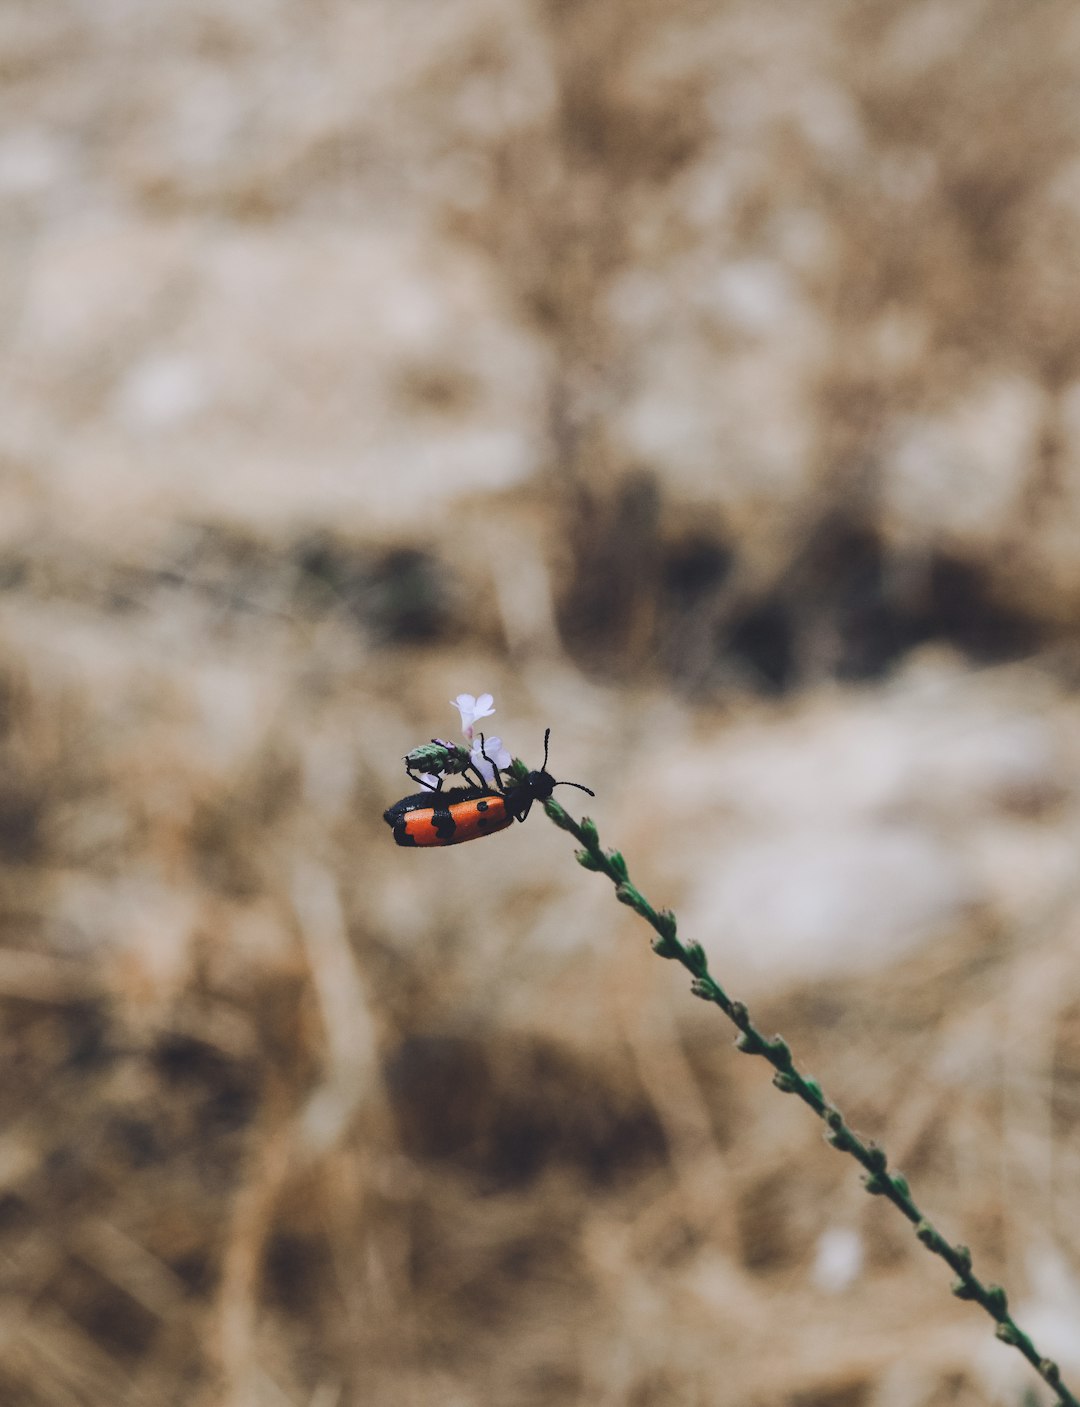 red and black ladybug on green rope during daytime